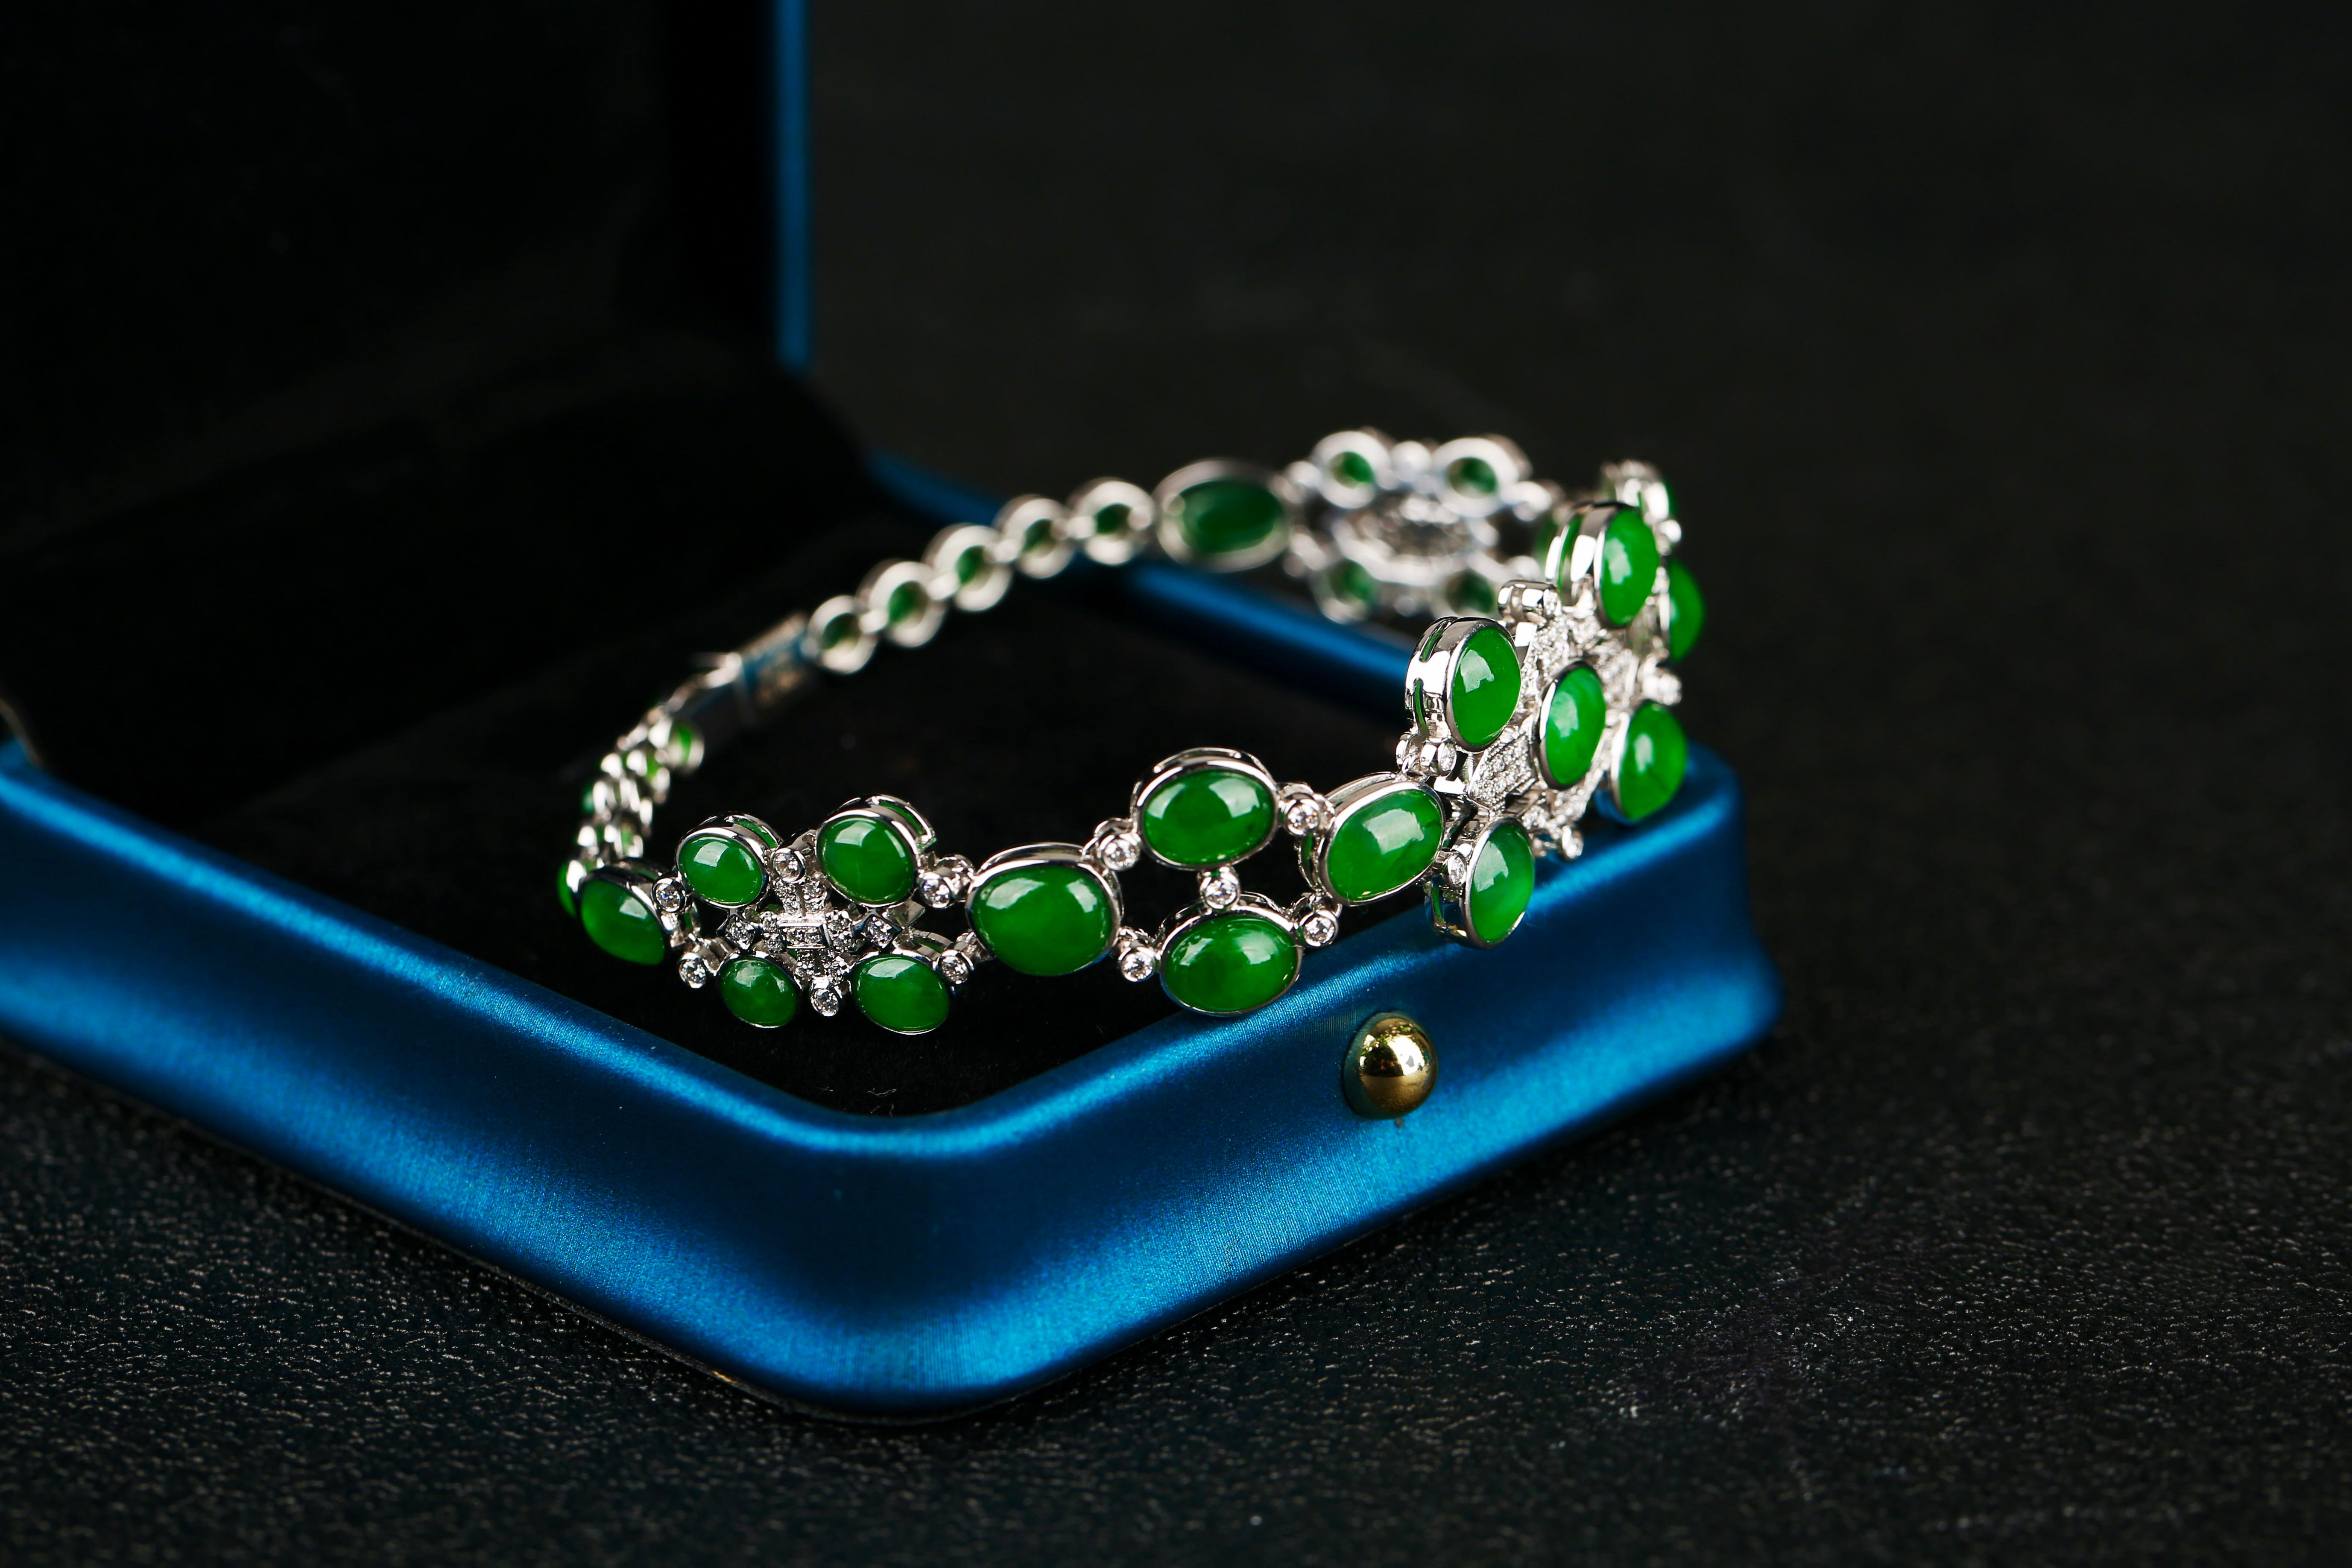 A Type A Natural Green Jadeite Jade and Diamond Bracelet in 18k White Gold
Type A natural green colour transparent Jadeite Jade
Total natural diamond weight is 1.6 ct , The Colour of the Diamond is Approximately E/F with VS Clarity

Type A jadeite